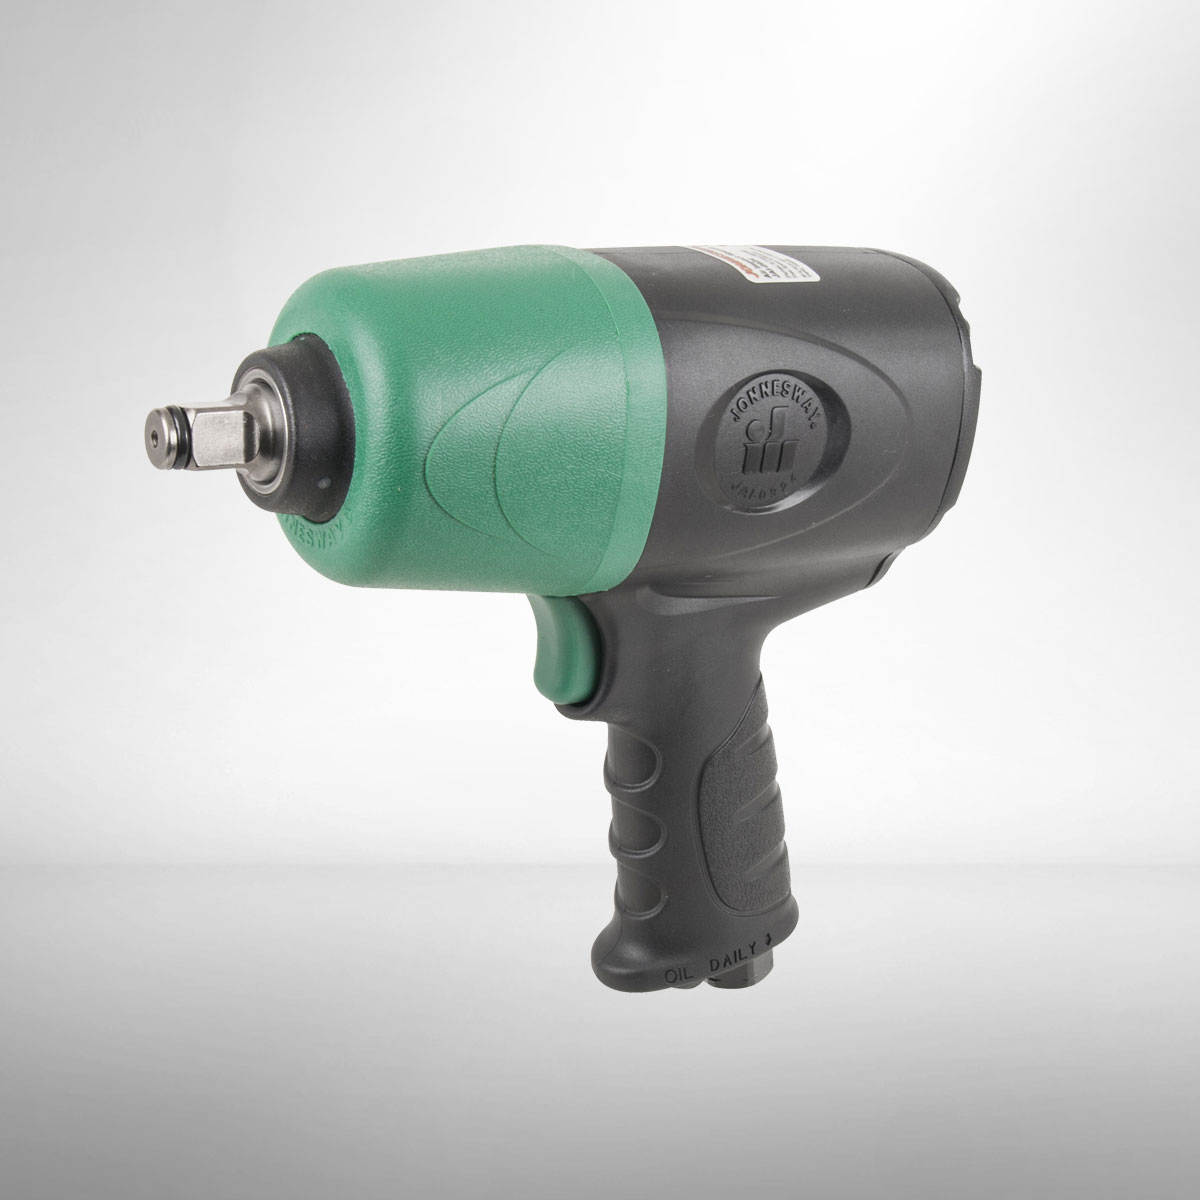 1/2″ Impact Wrench